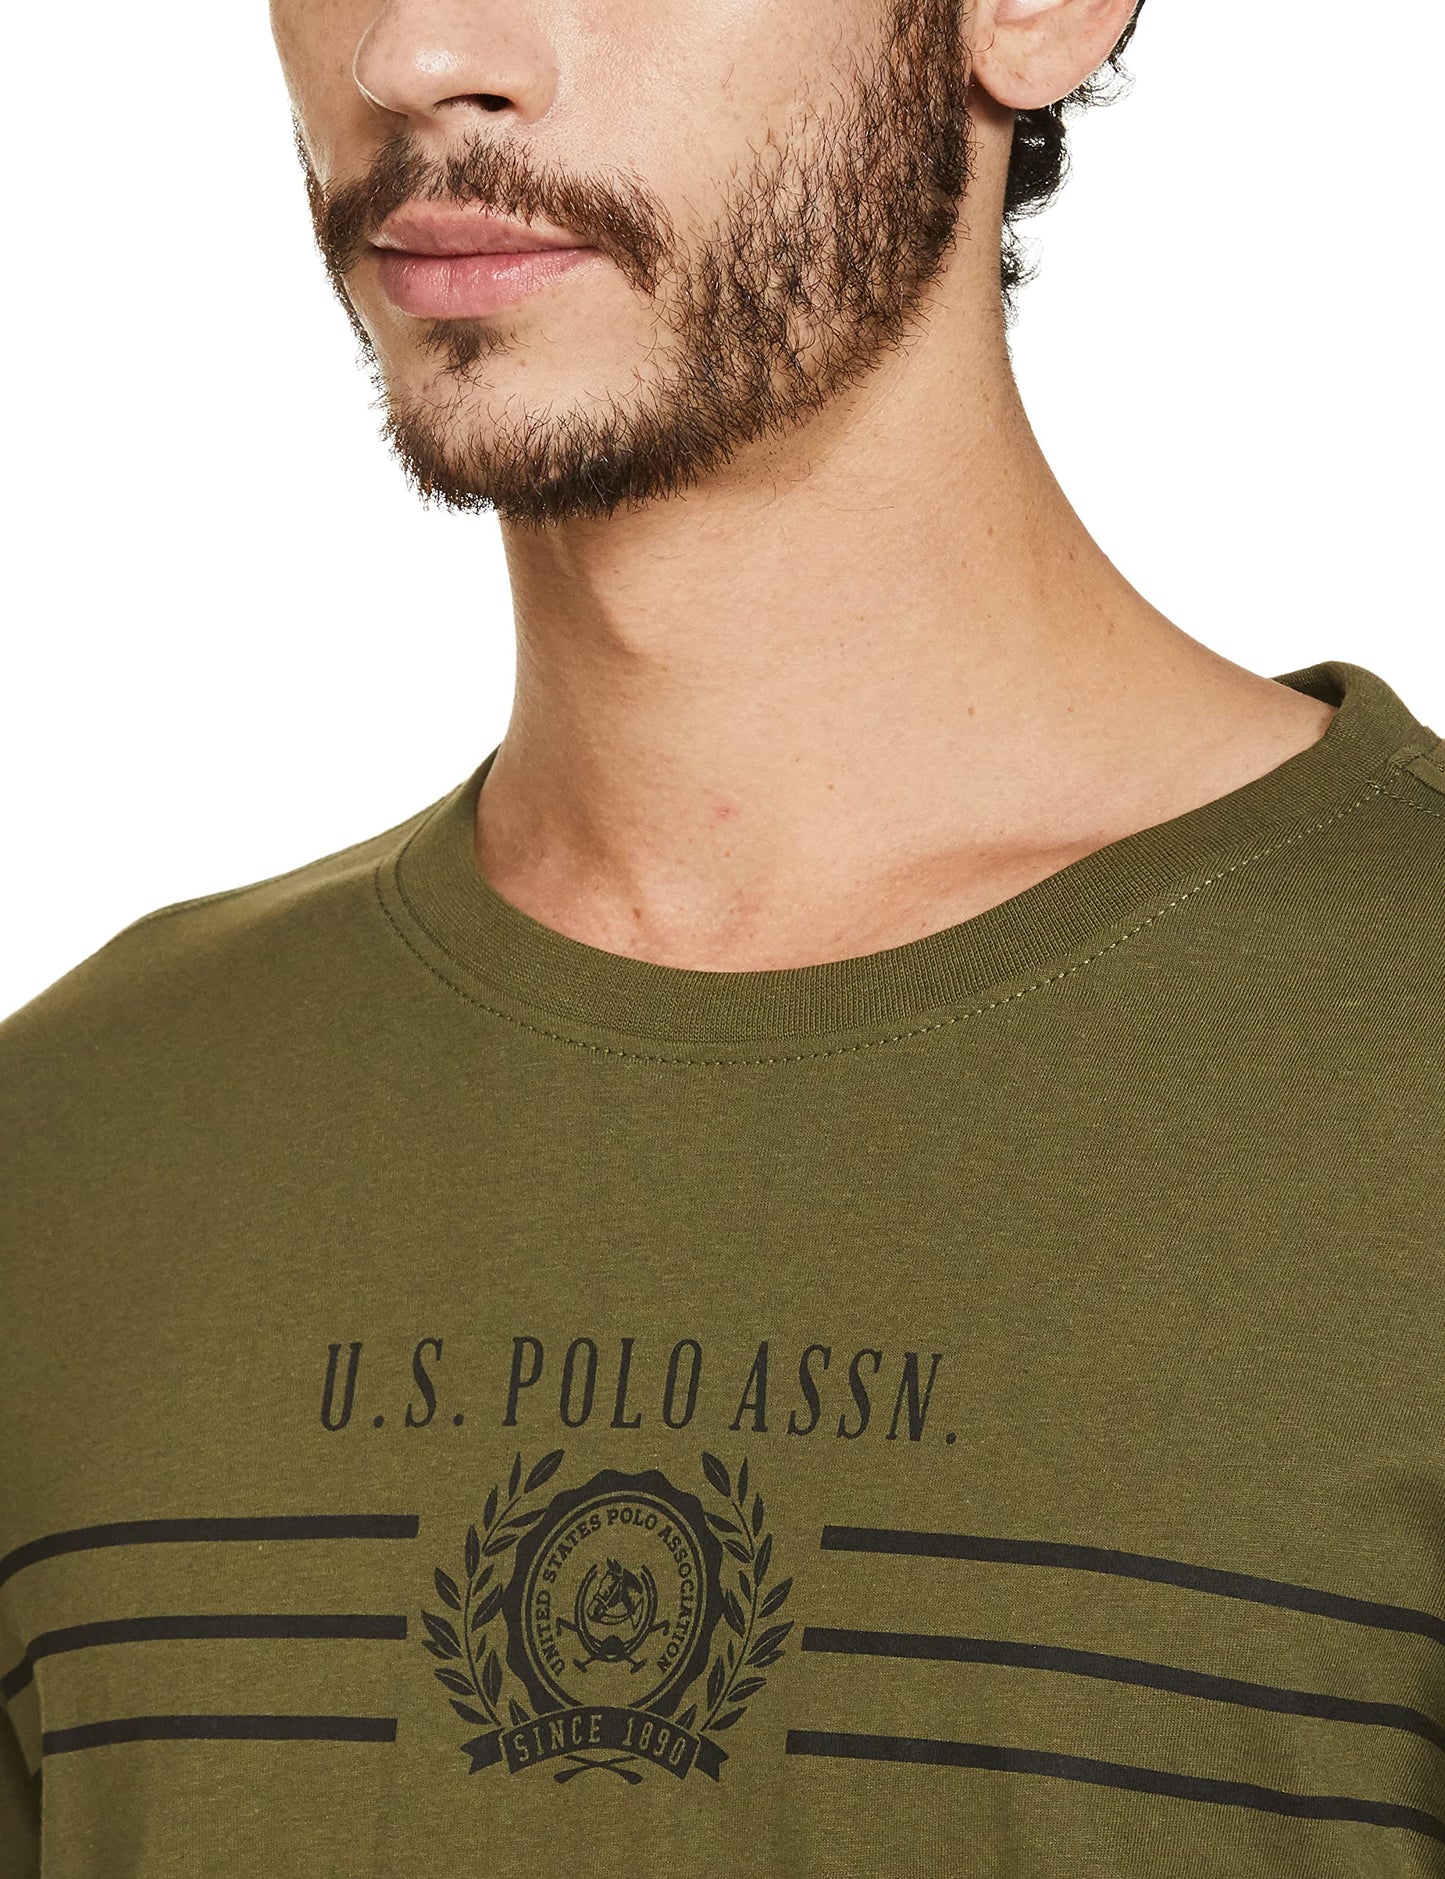 U.S. POLO ASSN. Mens Half Sleeve Round Neck T Shirts (USTSHS1369_Green_L)